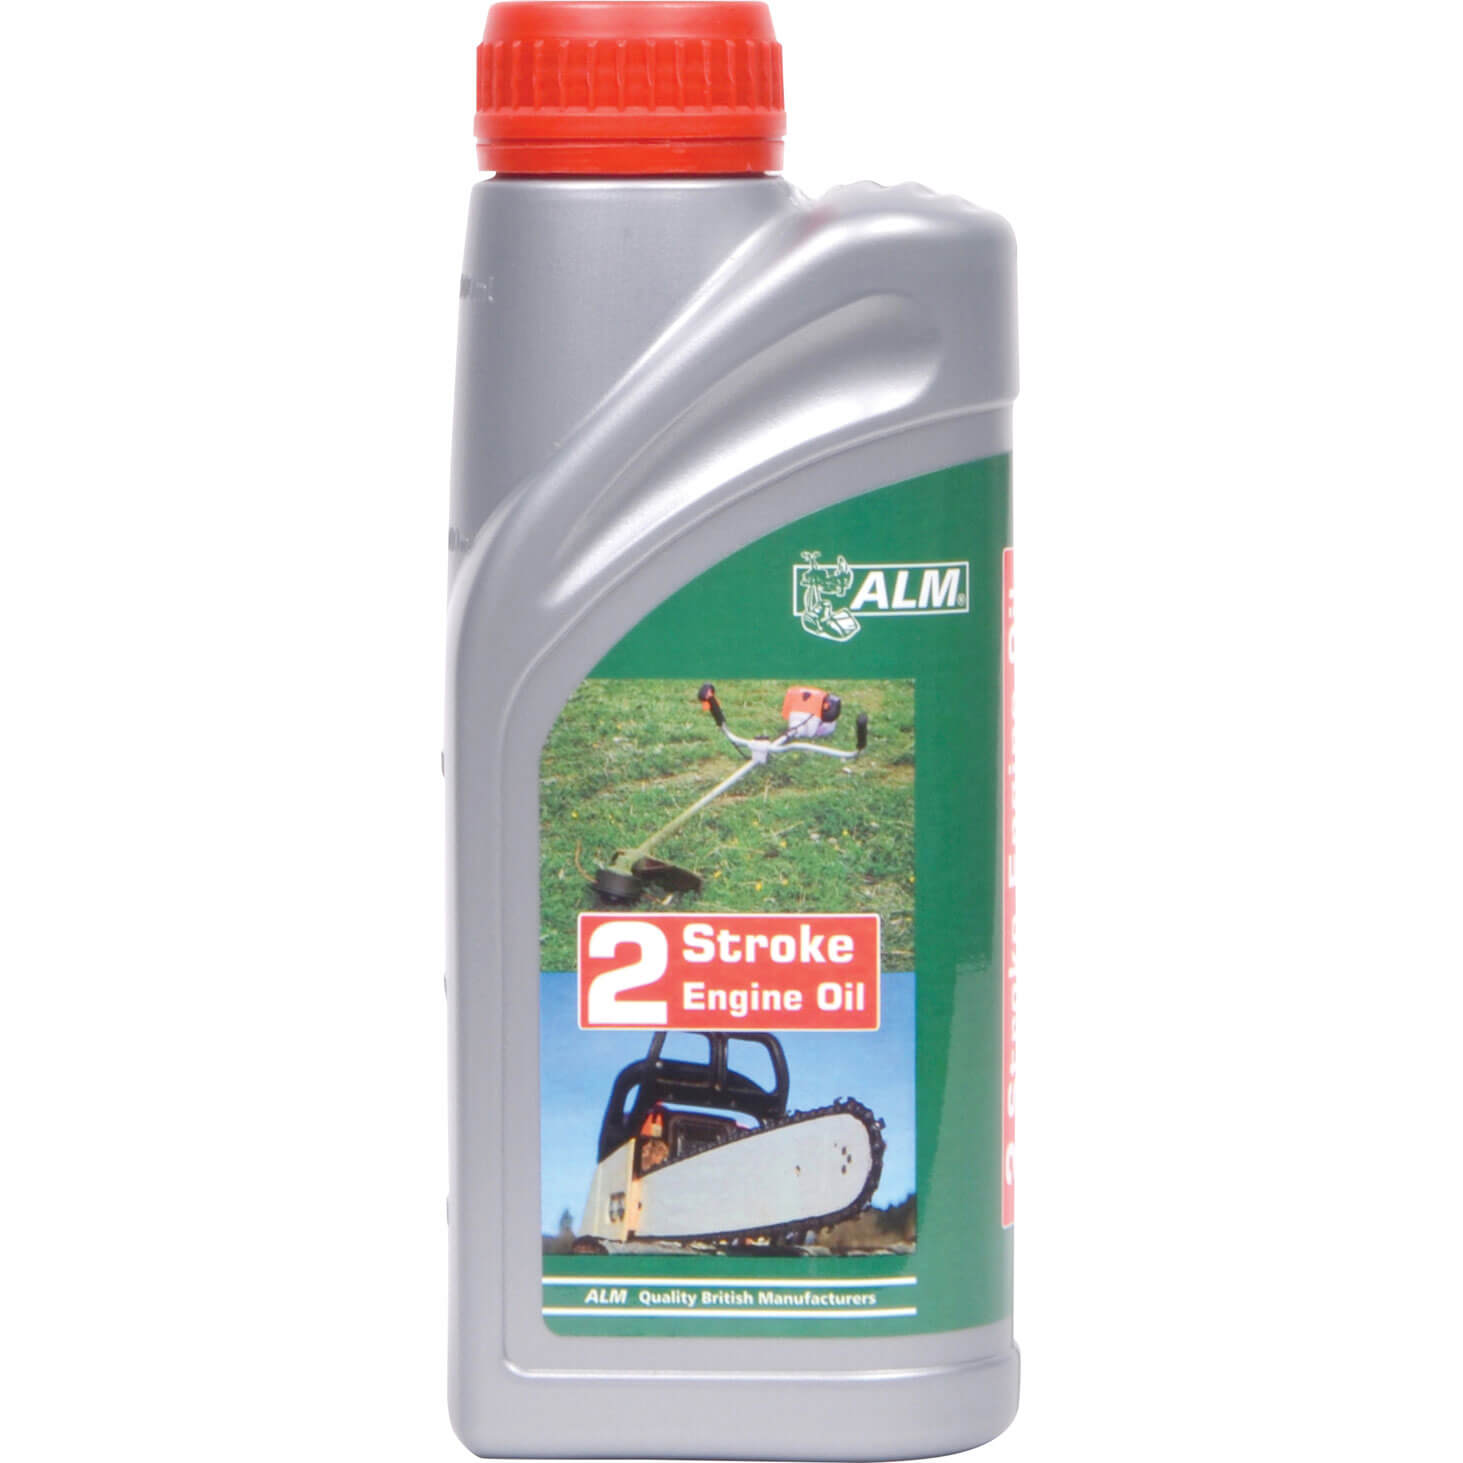 Image of 2 stroke oil 500ml for garden tools and lawnmowers